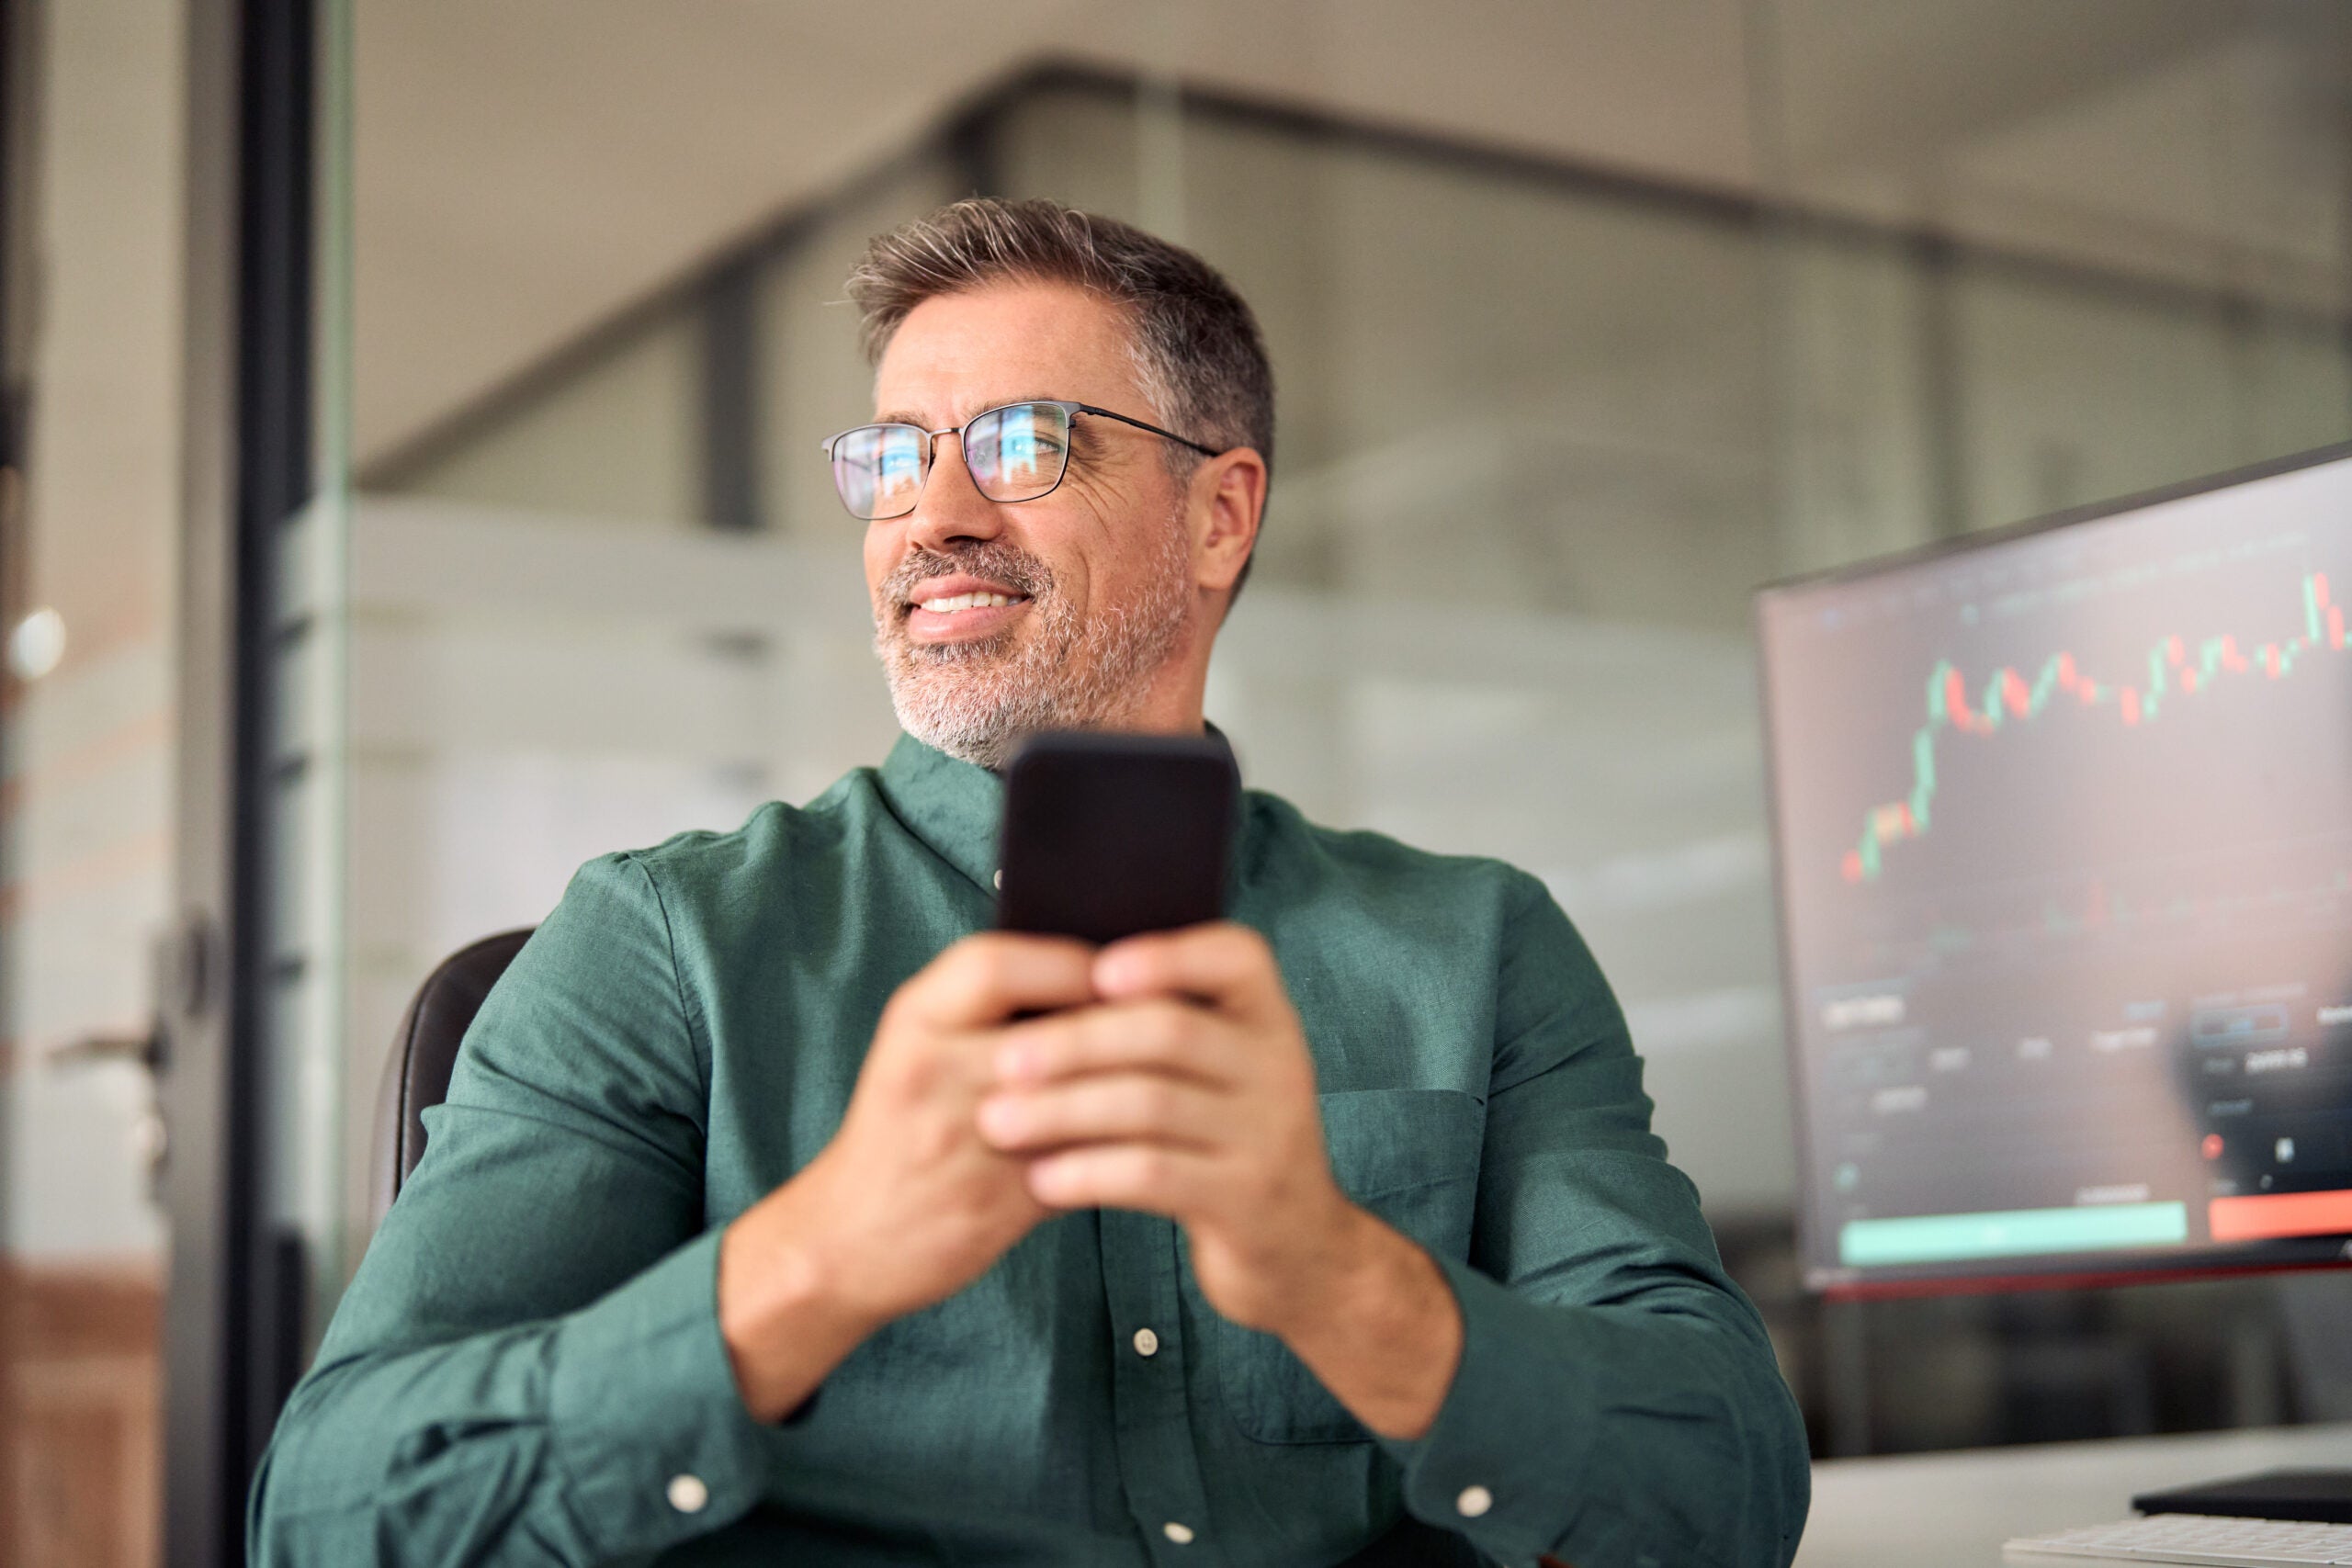 Crypto investor broker using smartphone trading app on cell phone. Middle aged stock trader analyzing financial trade stock market digital data on smartphone thinking of investing funds looking aside.